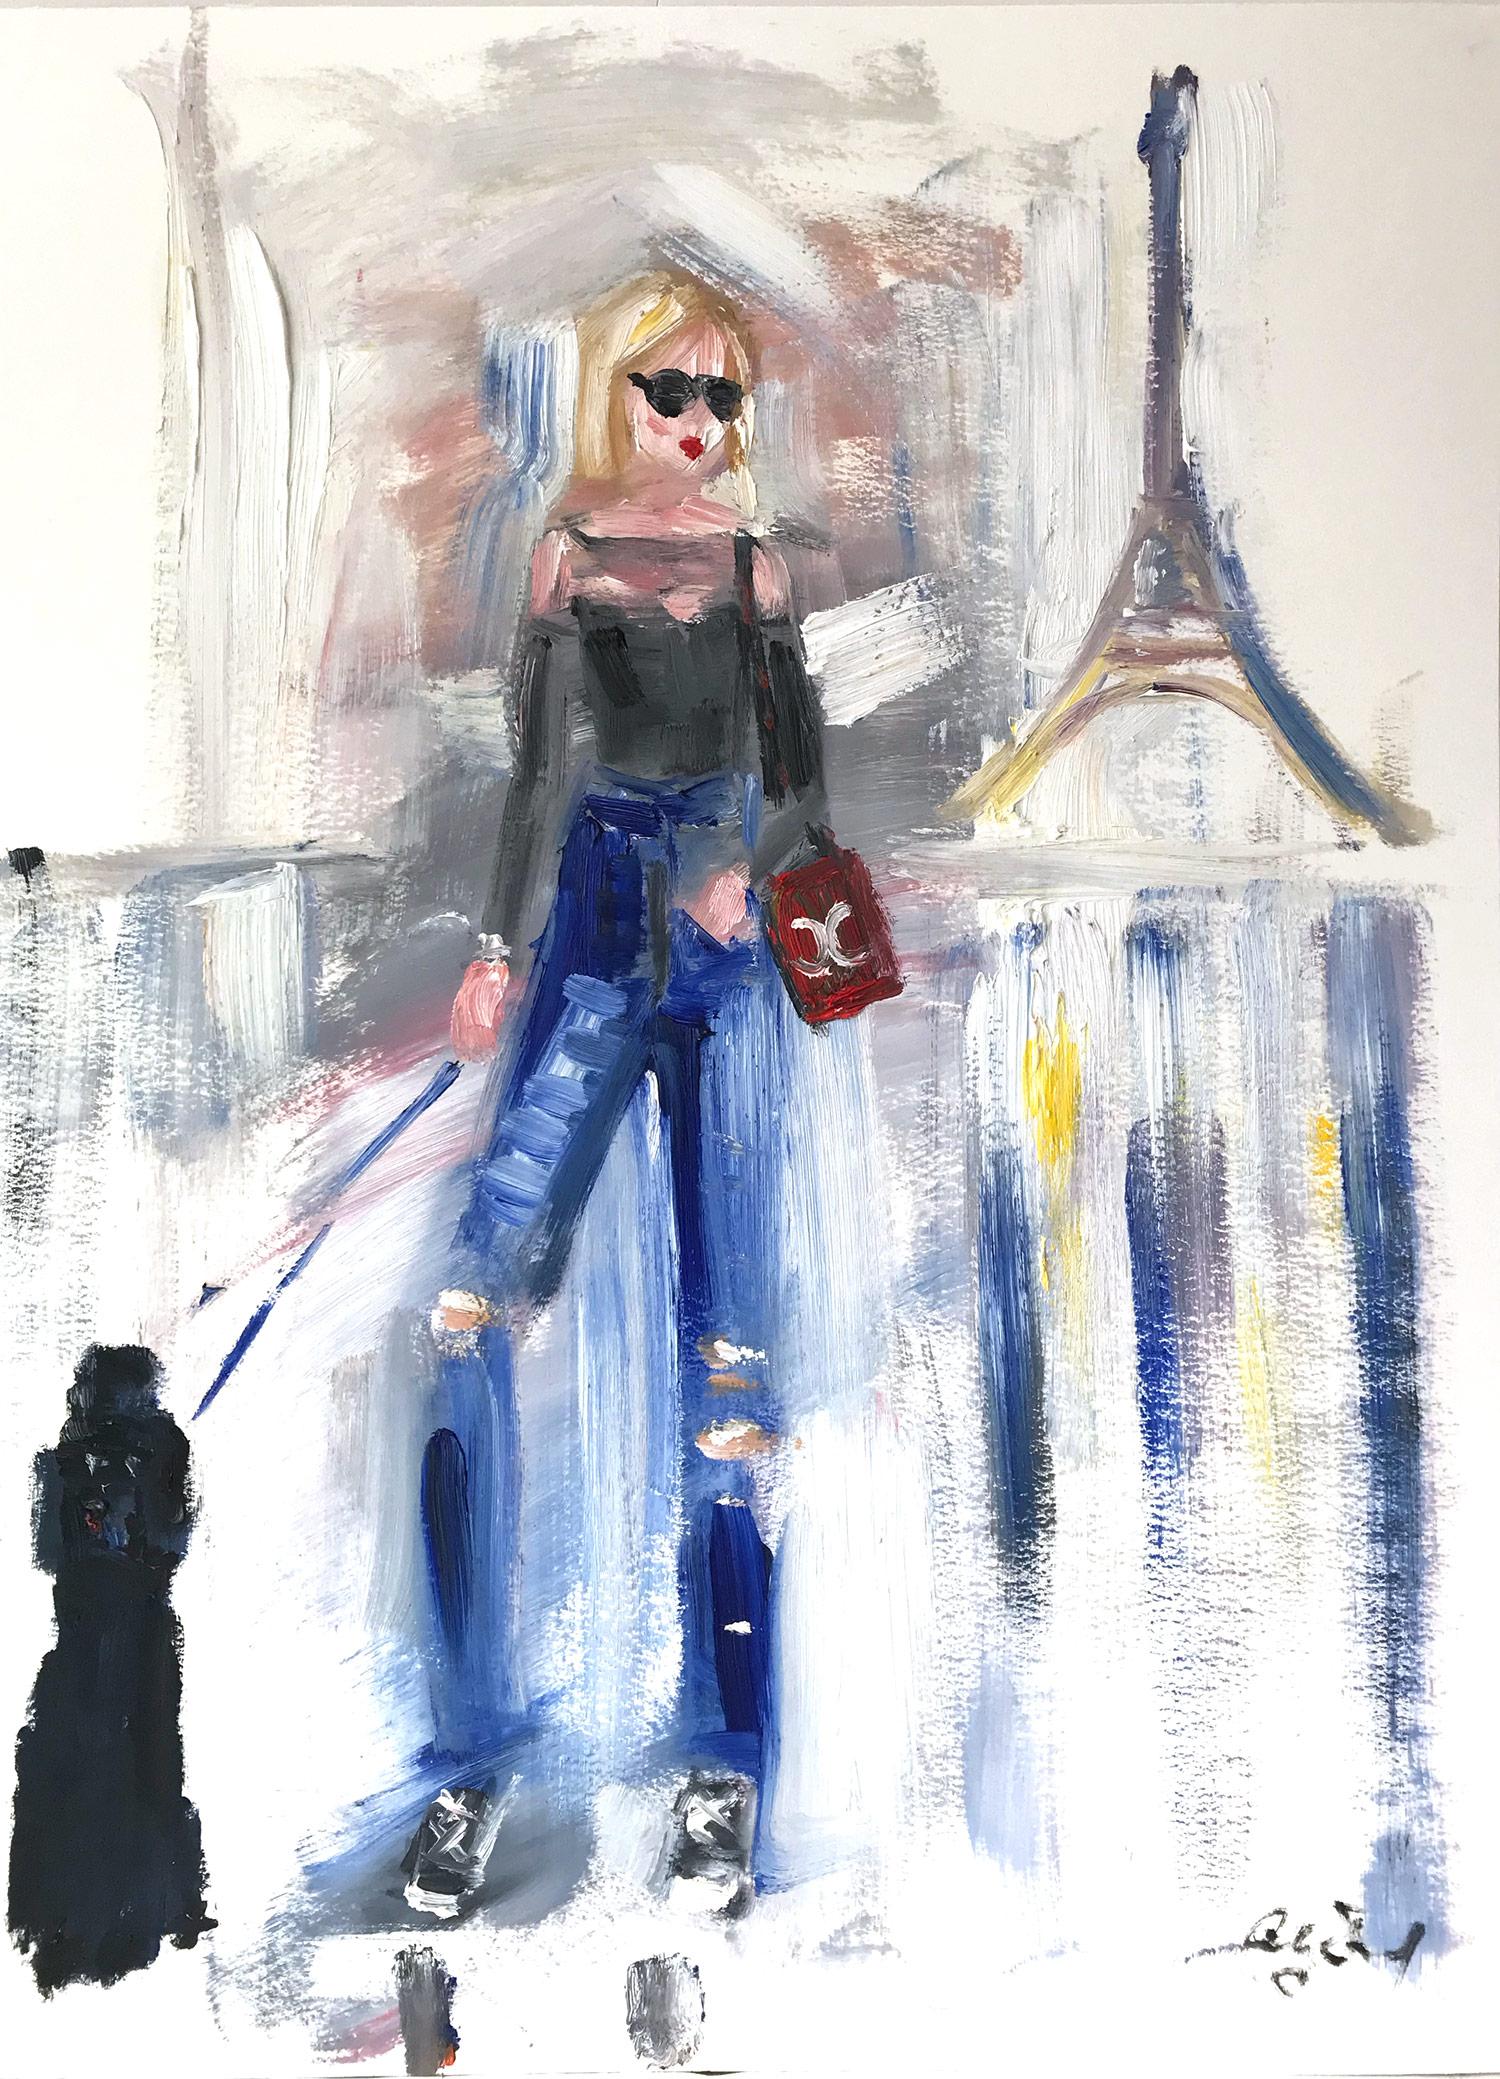 Cindy Shaoul Figurative Painting - "Allie in Paris" Haute Couture Oil Painting on Paper in Chanel with Poodle Dog